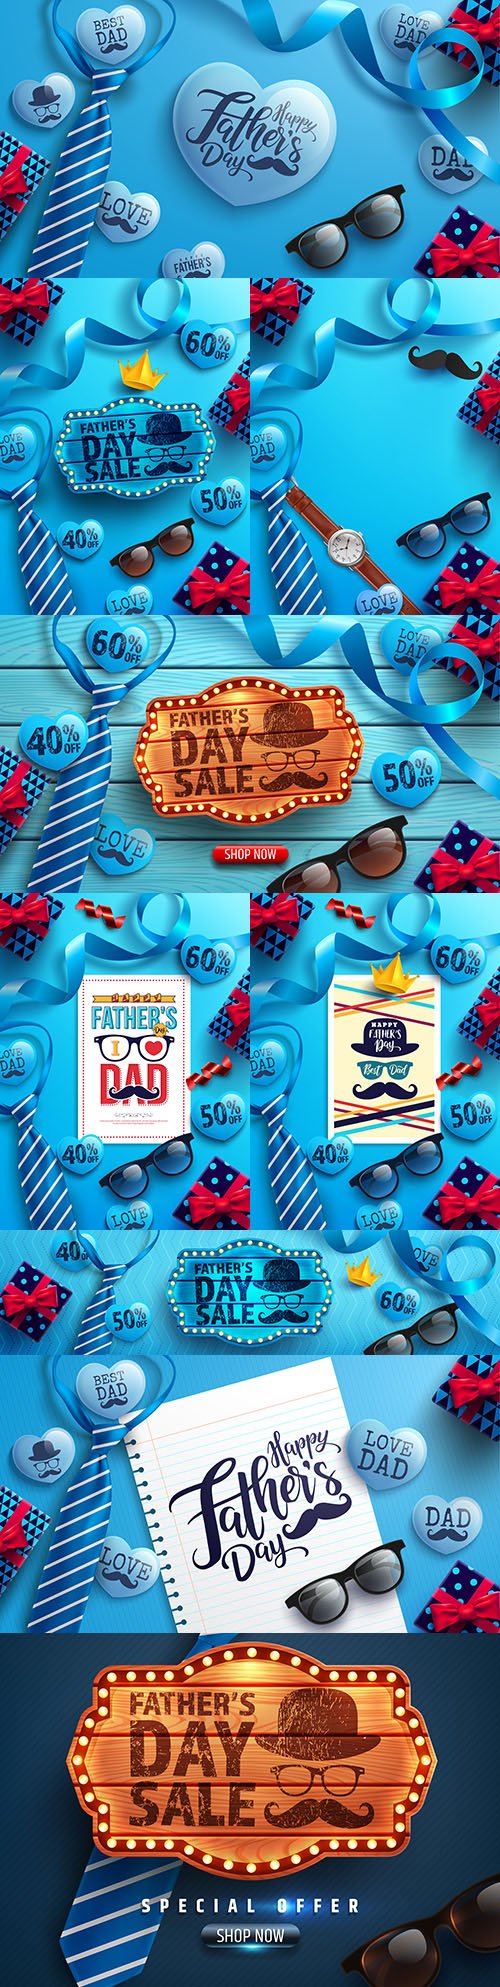 Happy father's day advertising banner illustration